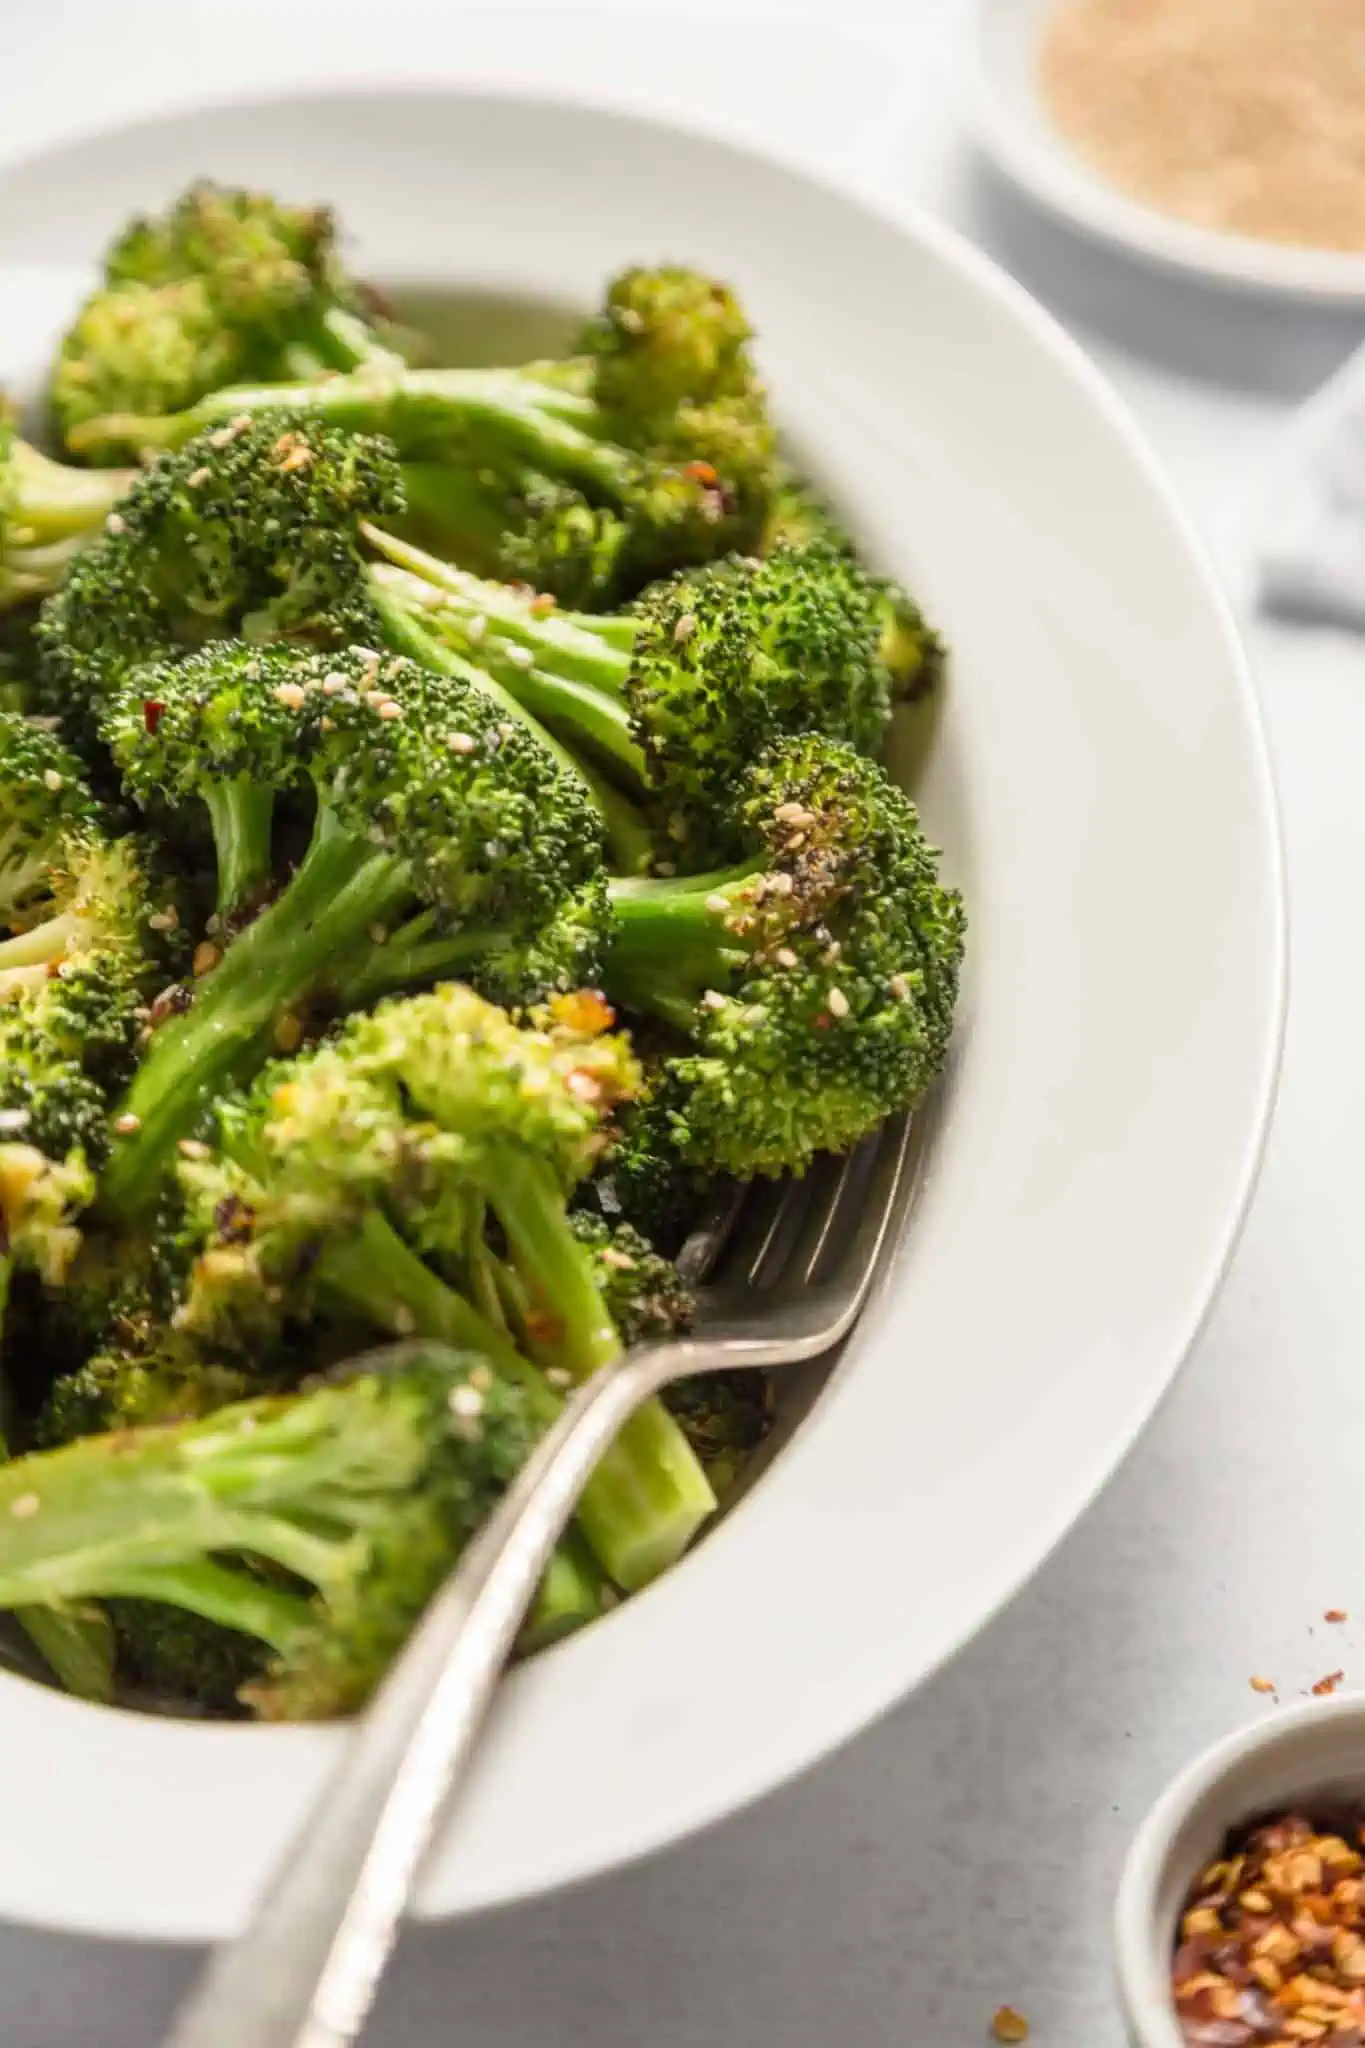 Easy Air Fried Broccoli Recipe Plant Based Vegetable Side Dish